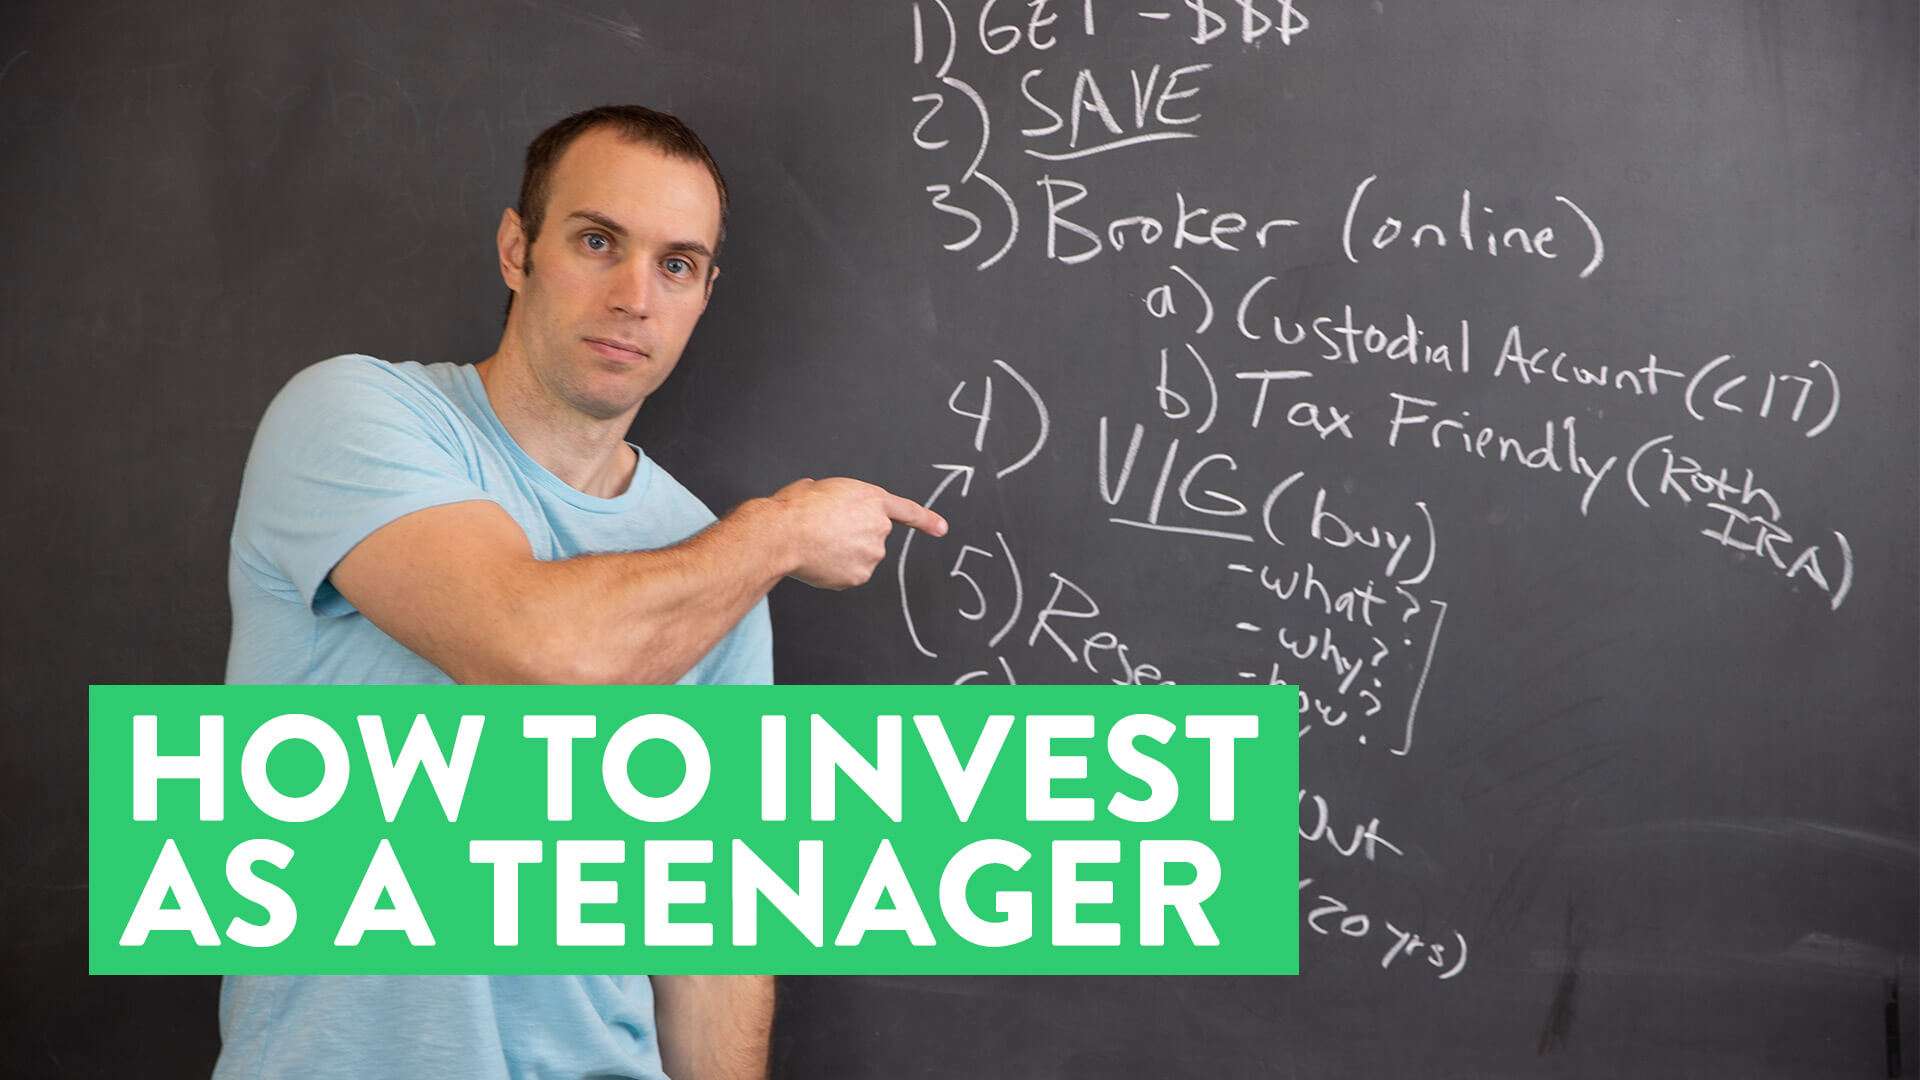 How to Invest Money as a Teenager (step